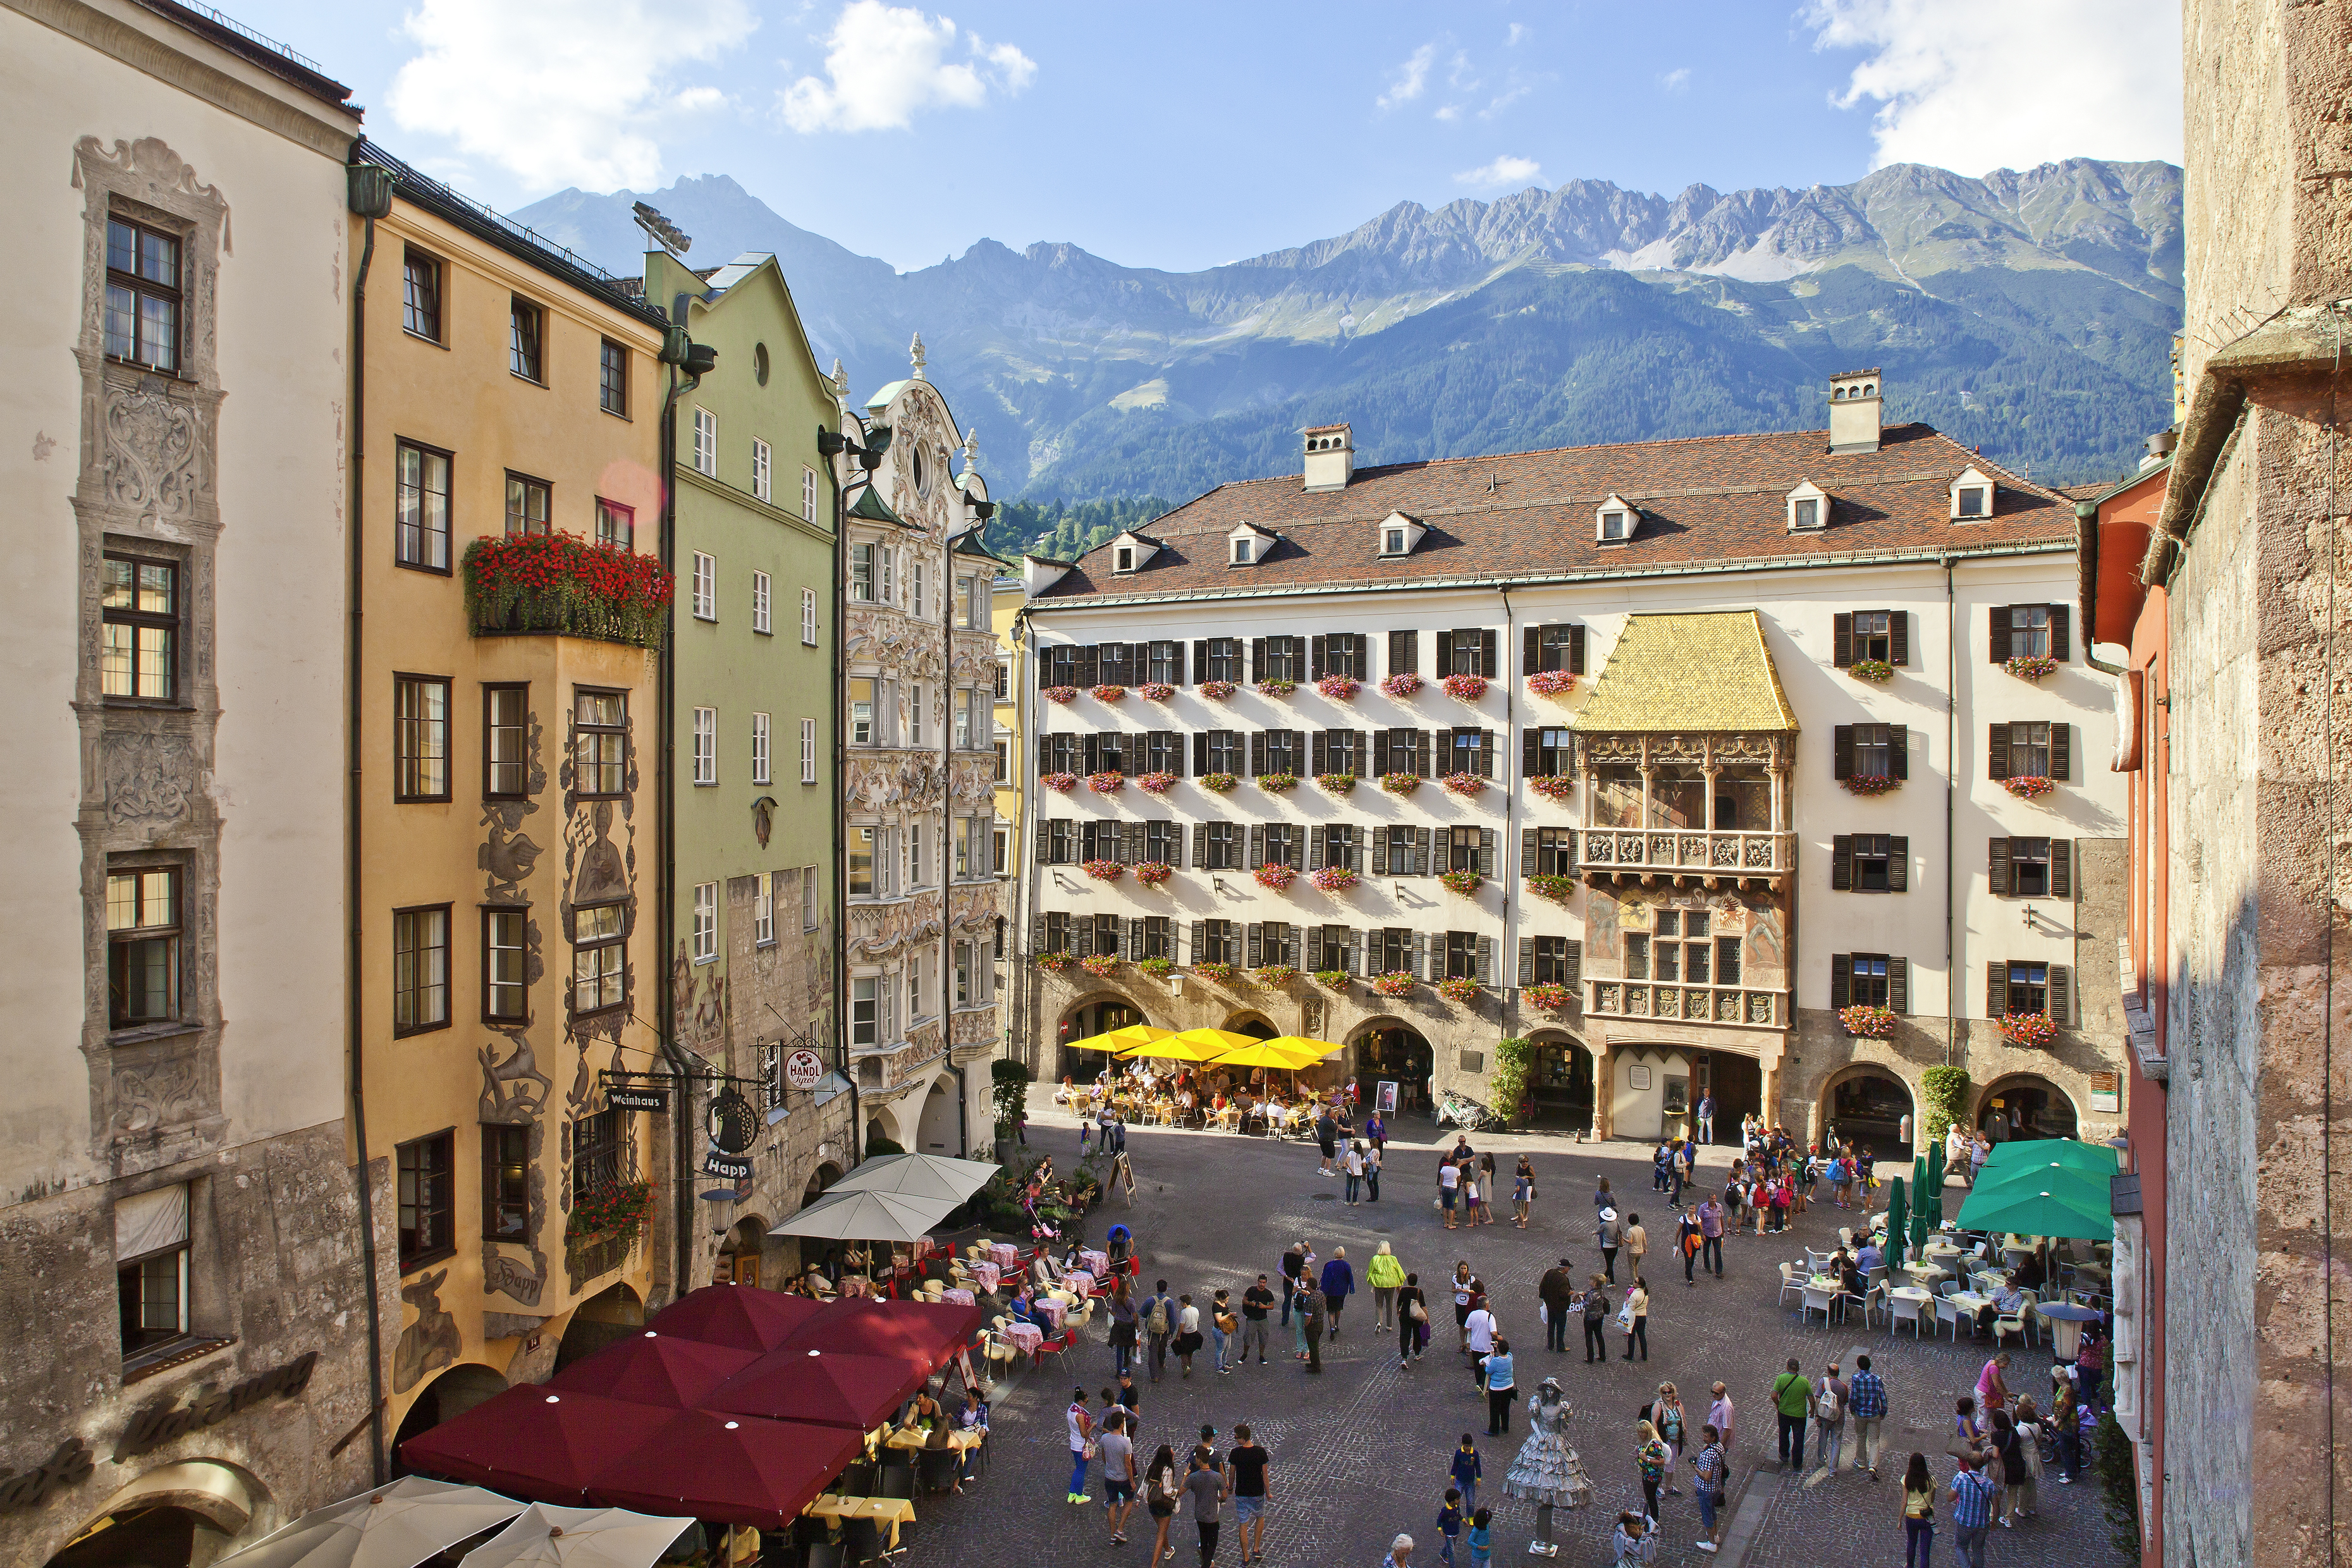 Innsbruck's Old Town, located a short drive from The Grassmayr family Bell Foundry and Bell Museum, which is also located in Innsbruck.